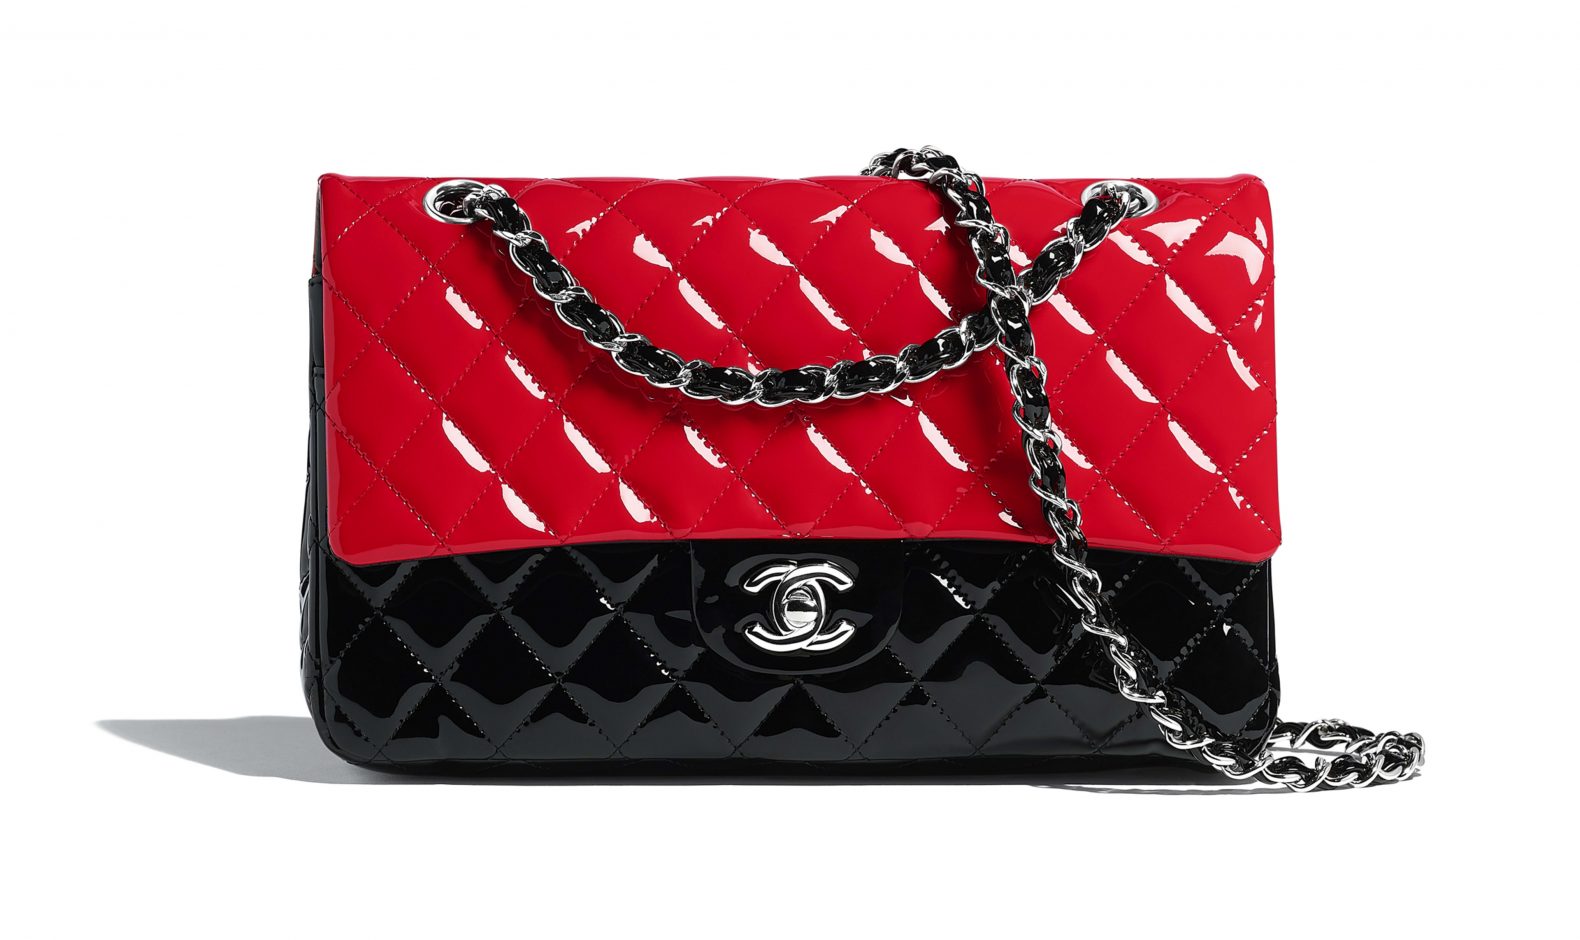 Chanel Bag Price Increases in the UK | Spotted Fashion